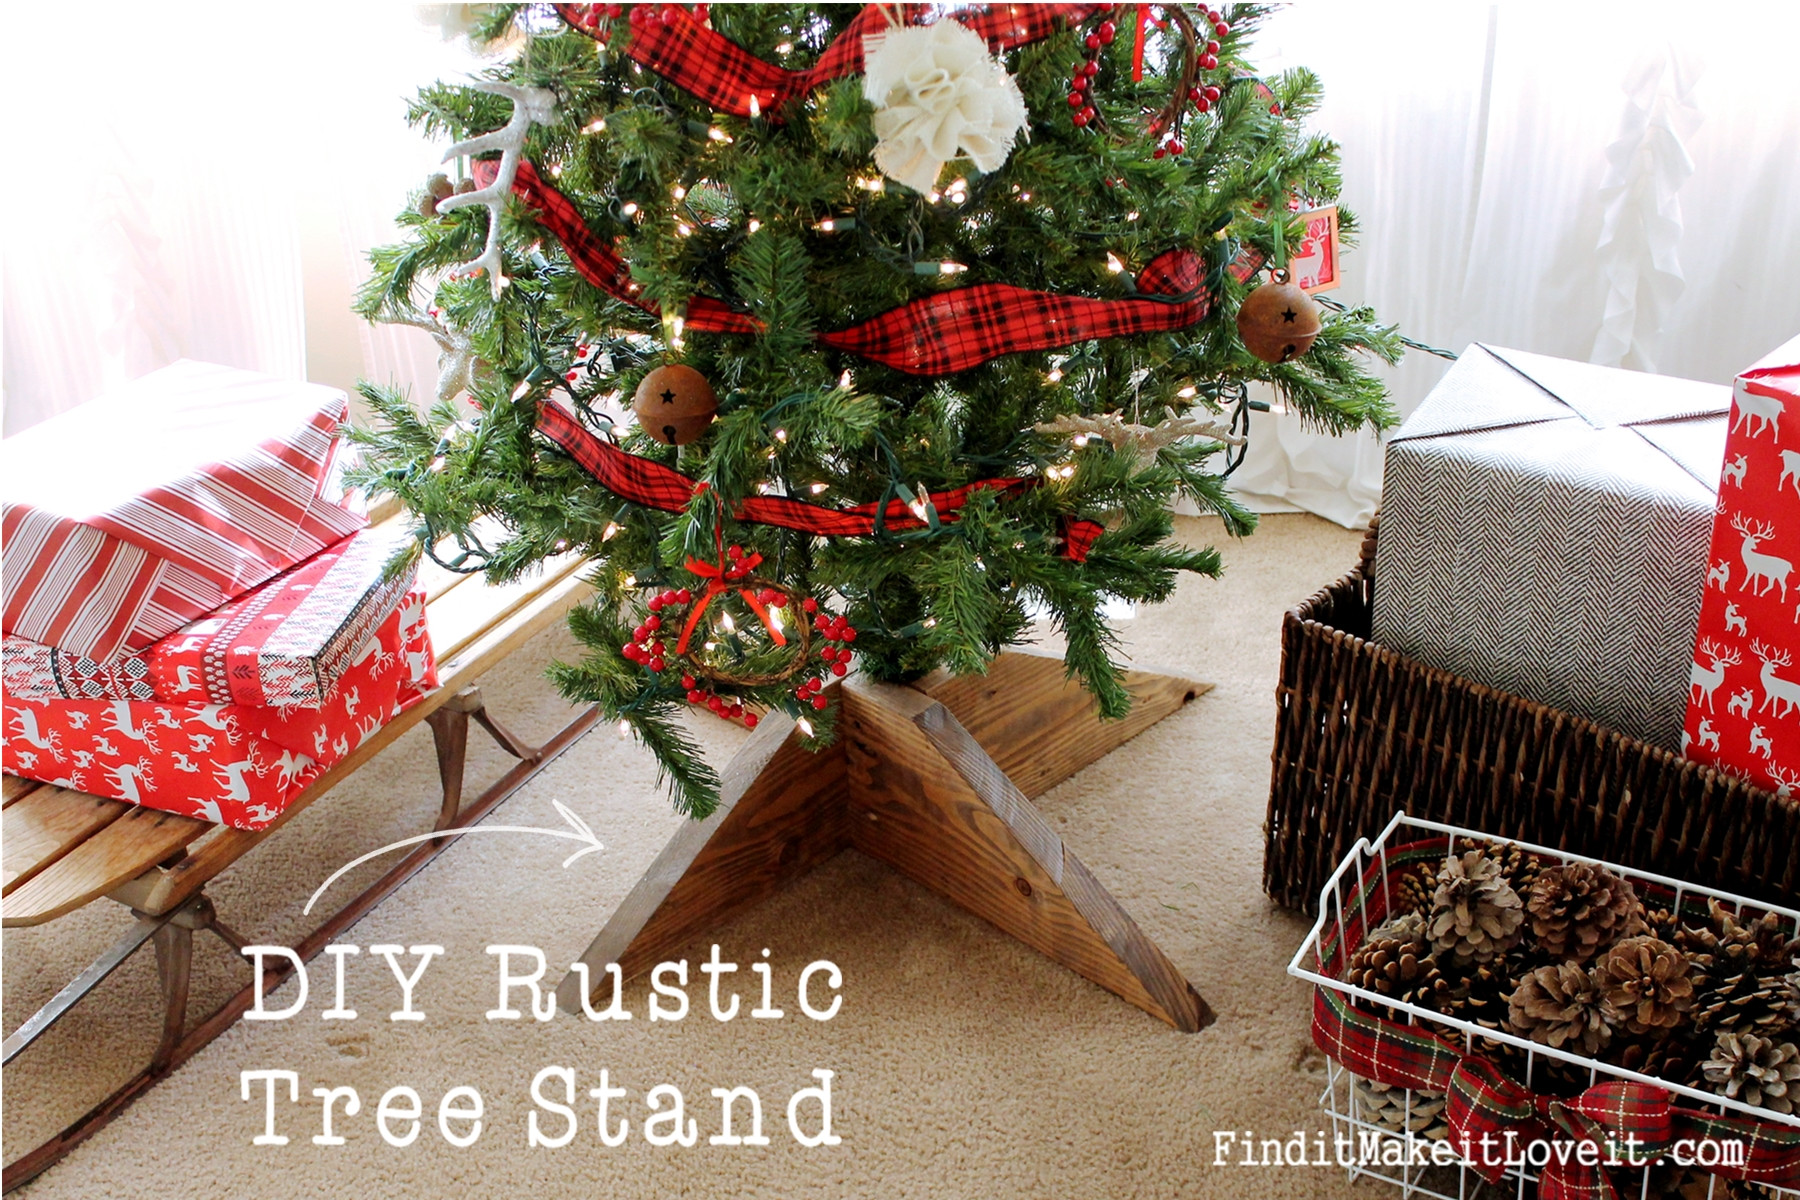 Best ideas about DIY Tree Stand
. Save or Pin DIY Rustic Tree Stand Find it Make it Love it Now.